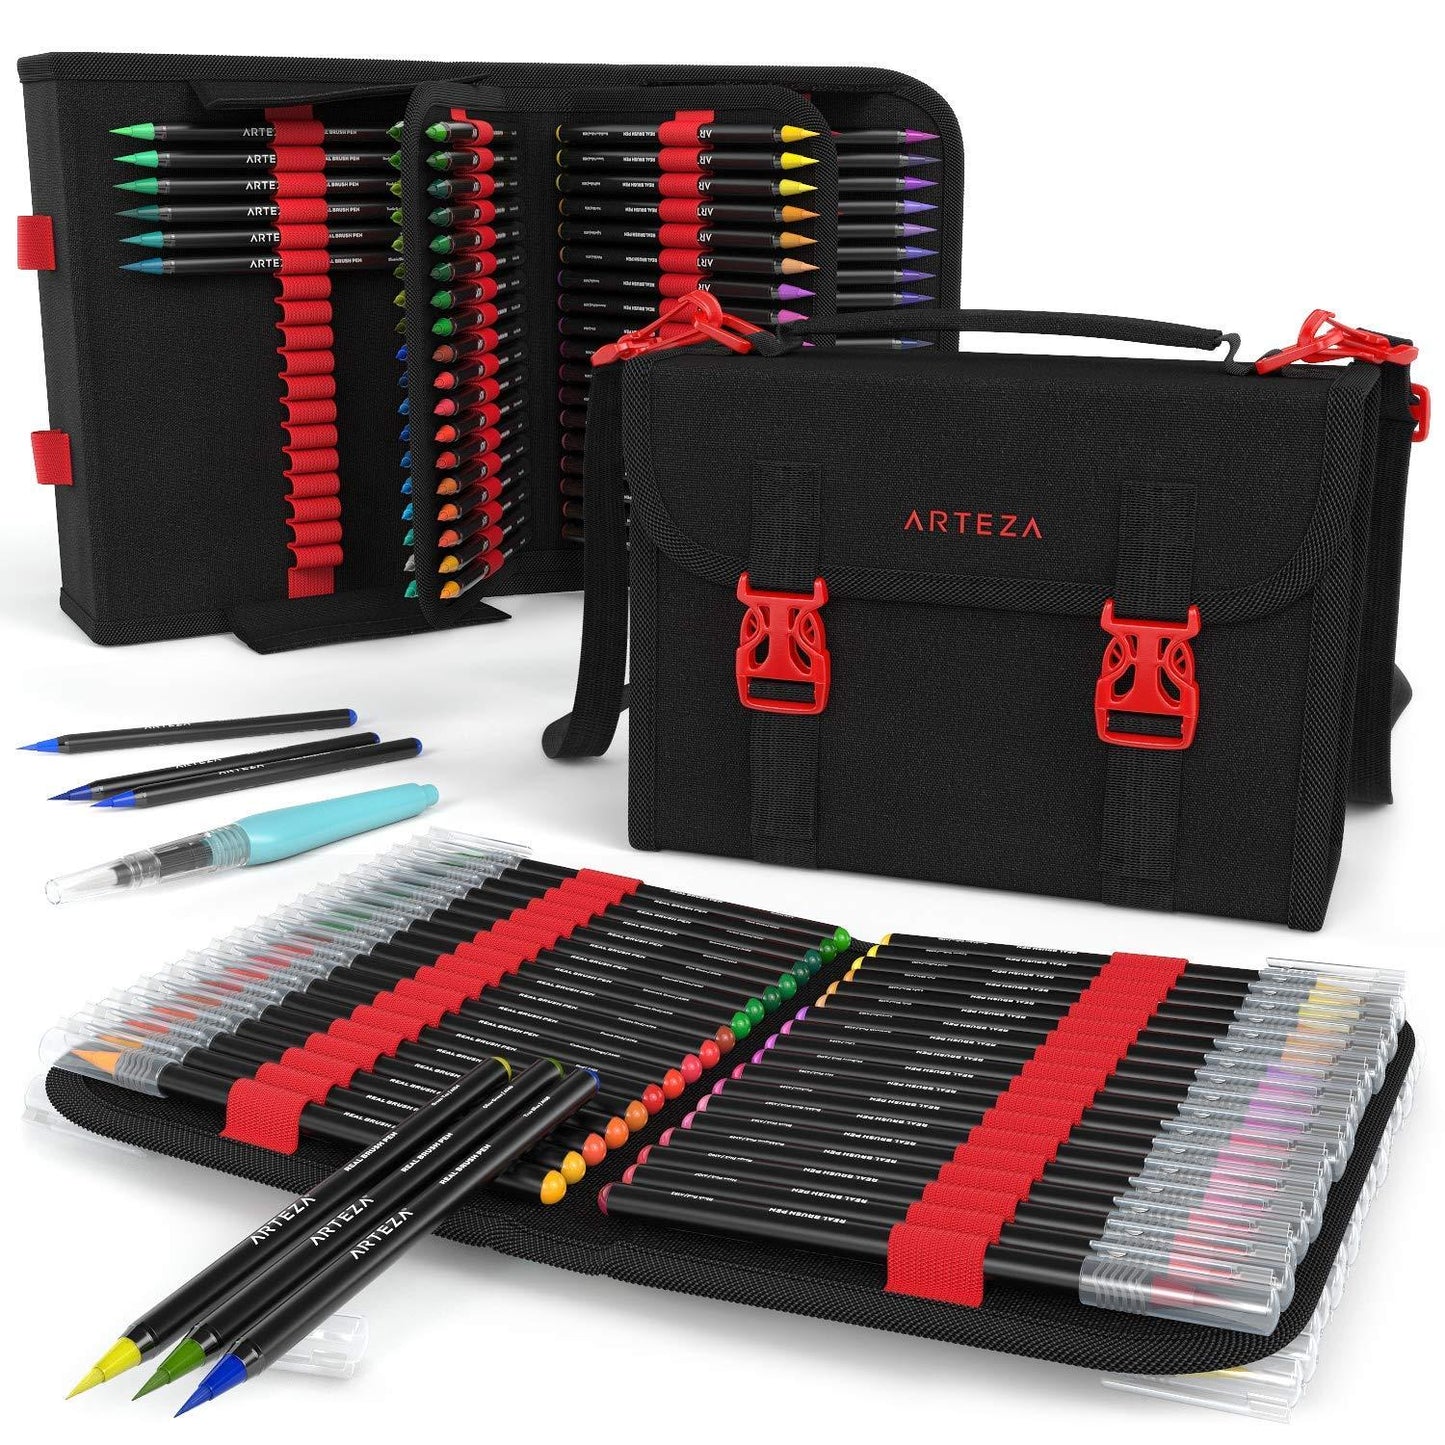 Swatch Form: Arteza Real Brush Pens 96pc. 